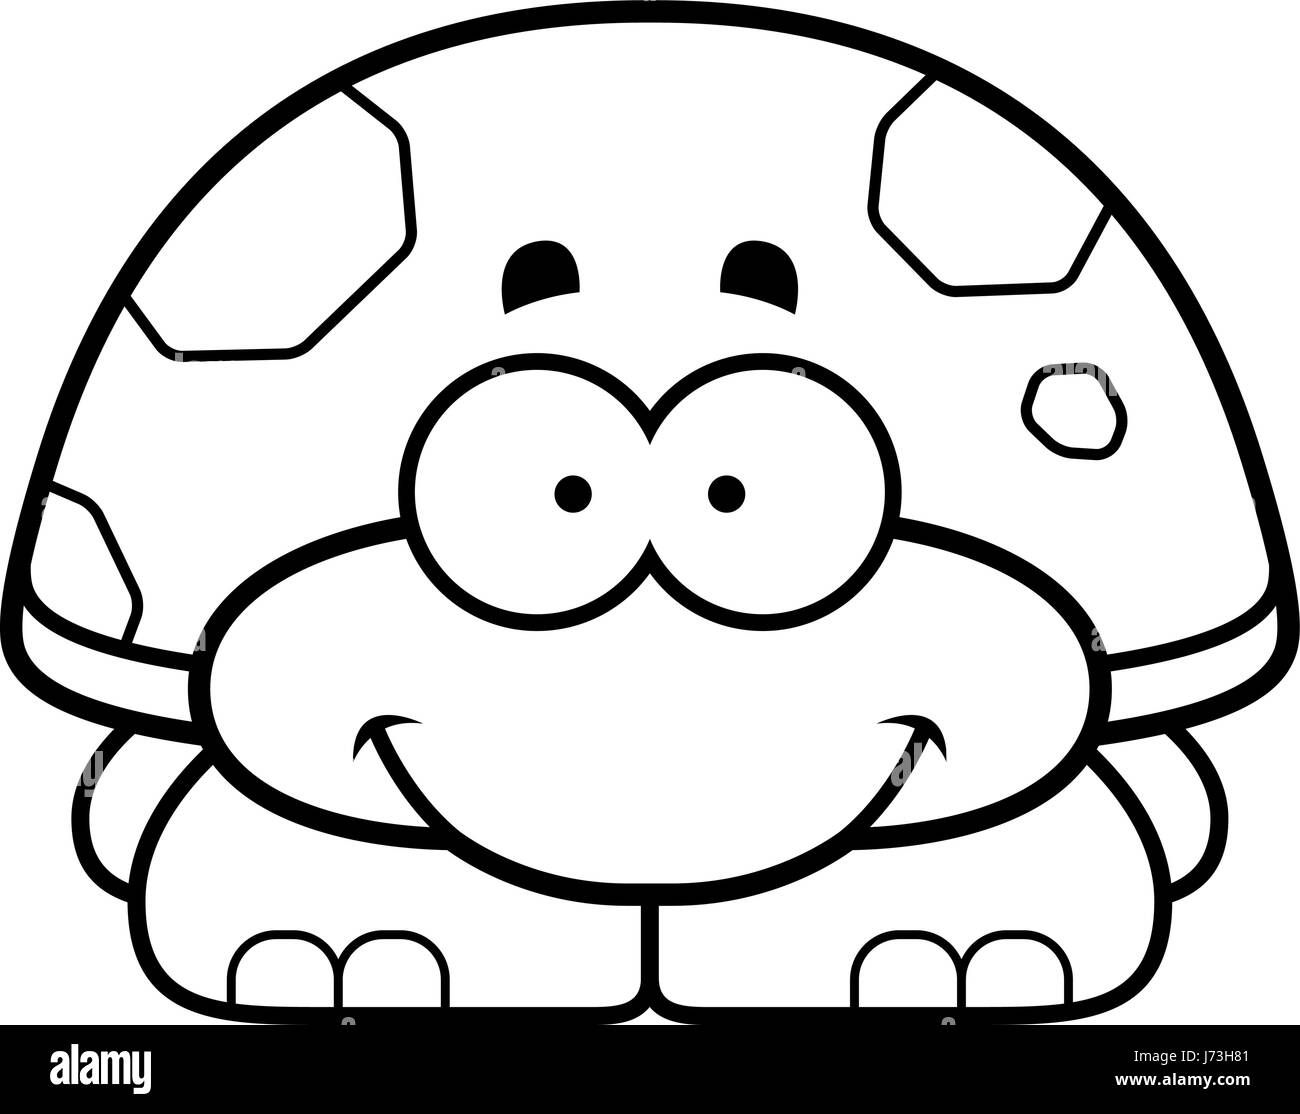 A cartoon illustration of a little turtle happy and smiling. Stock Vector